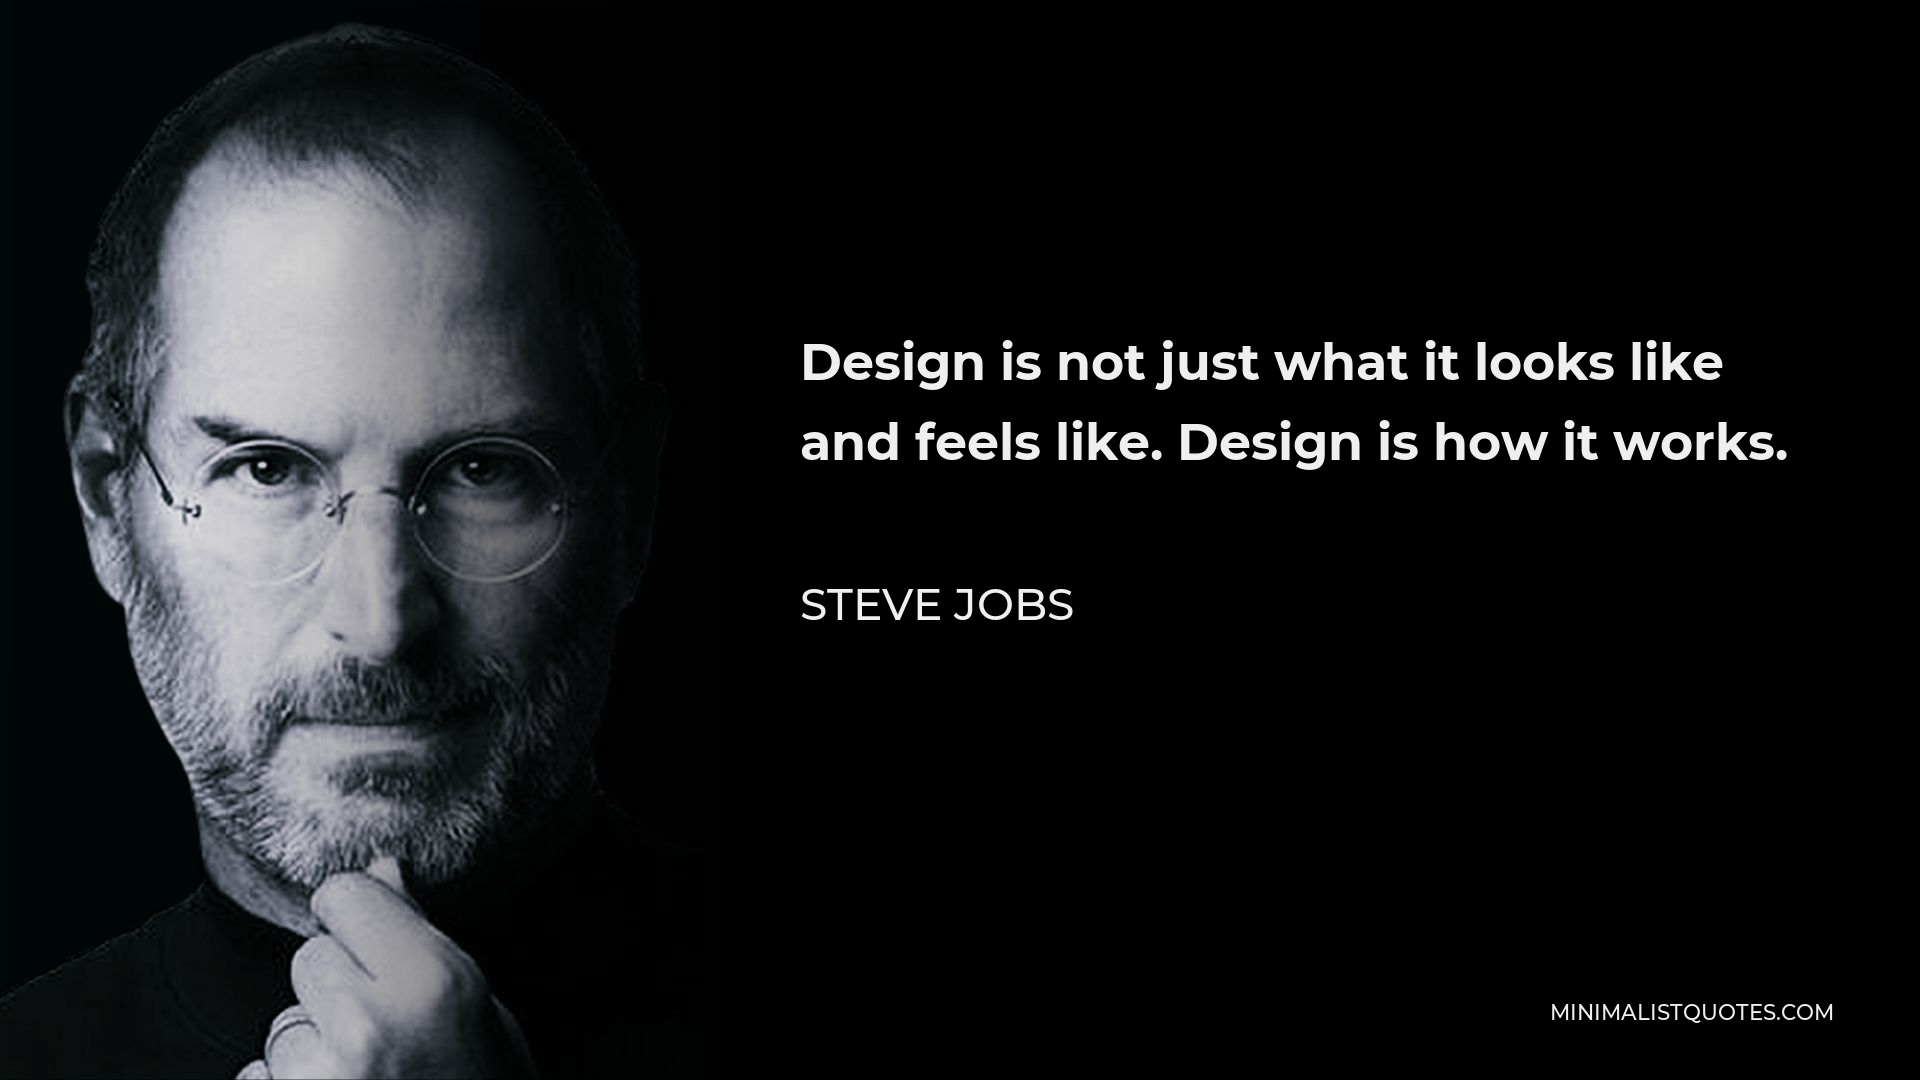 Steve Jobs Quote - Design is not just what it looks like and feels like. Design is how it works.